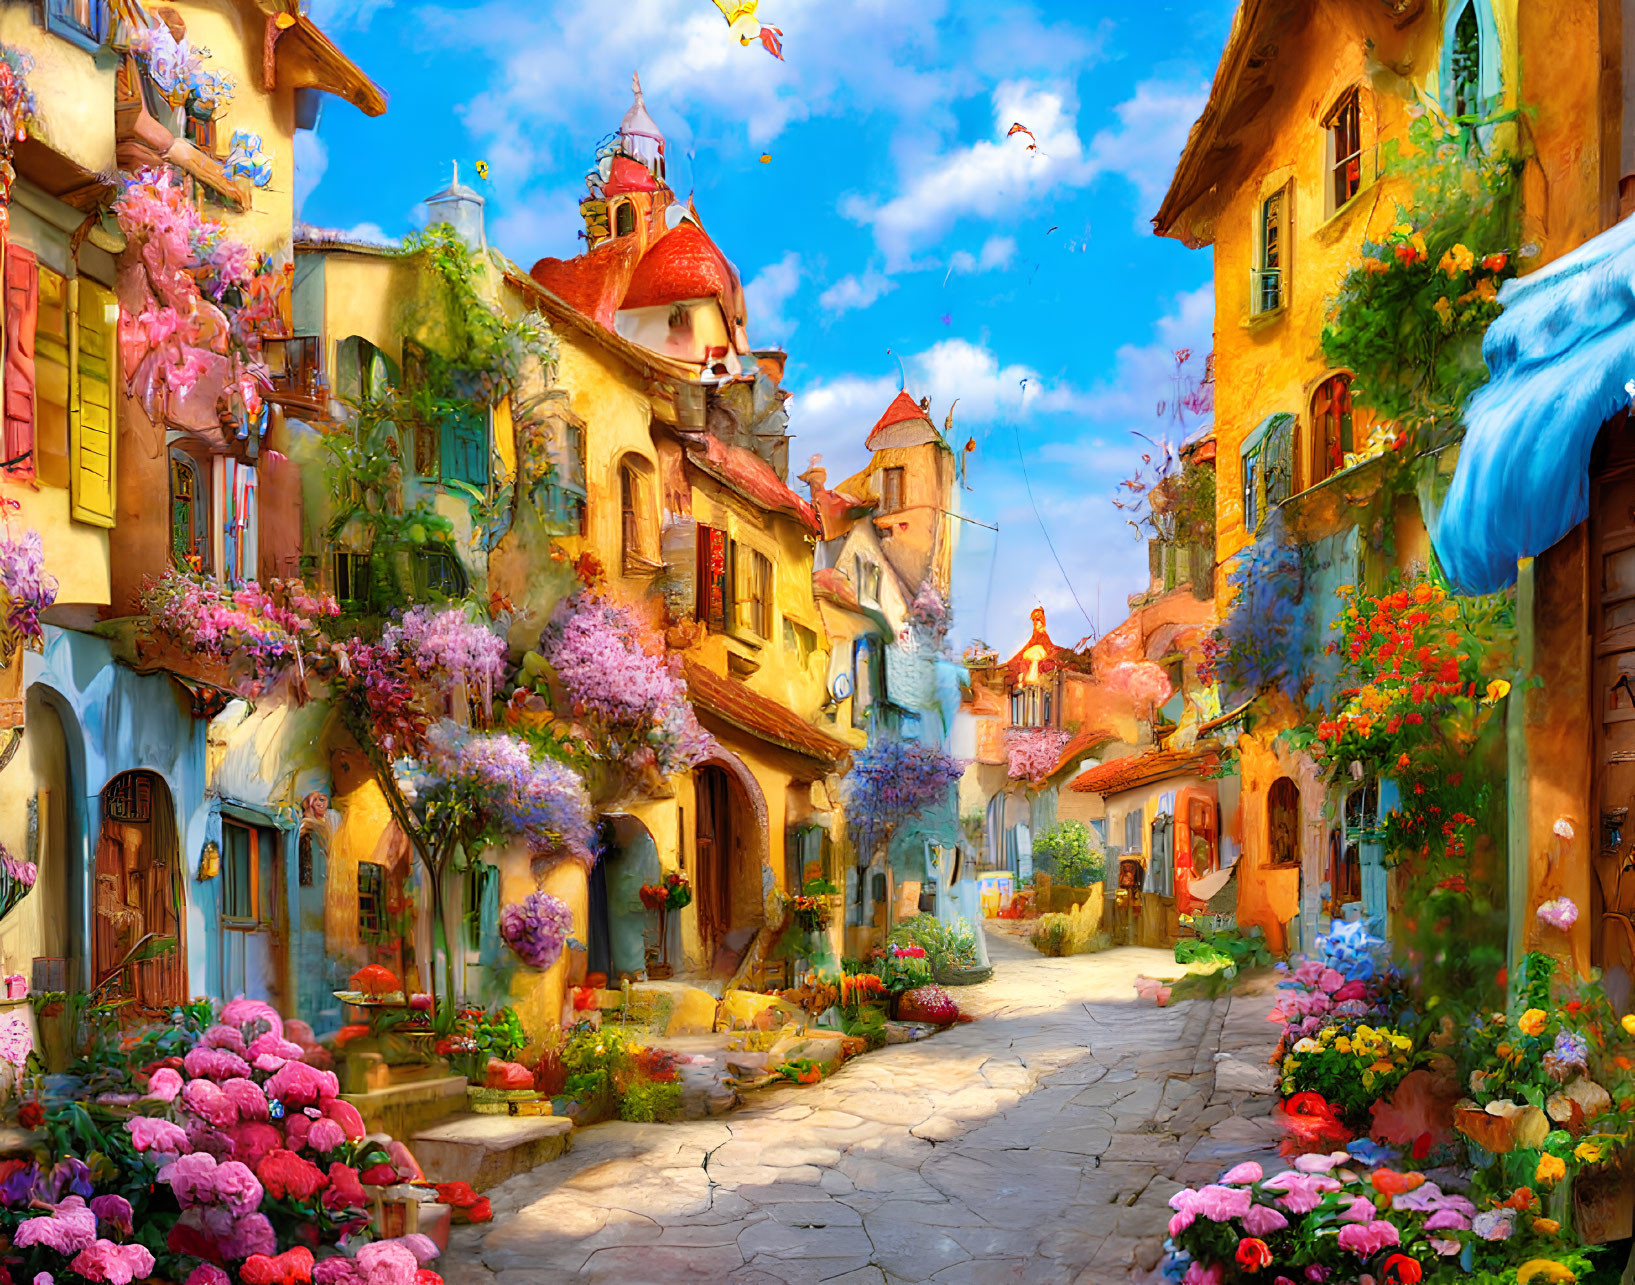 Colorful Flower-Adorned Houses on Cobblestone Street with Waterfall